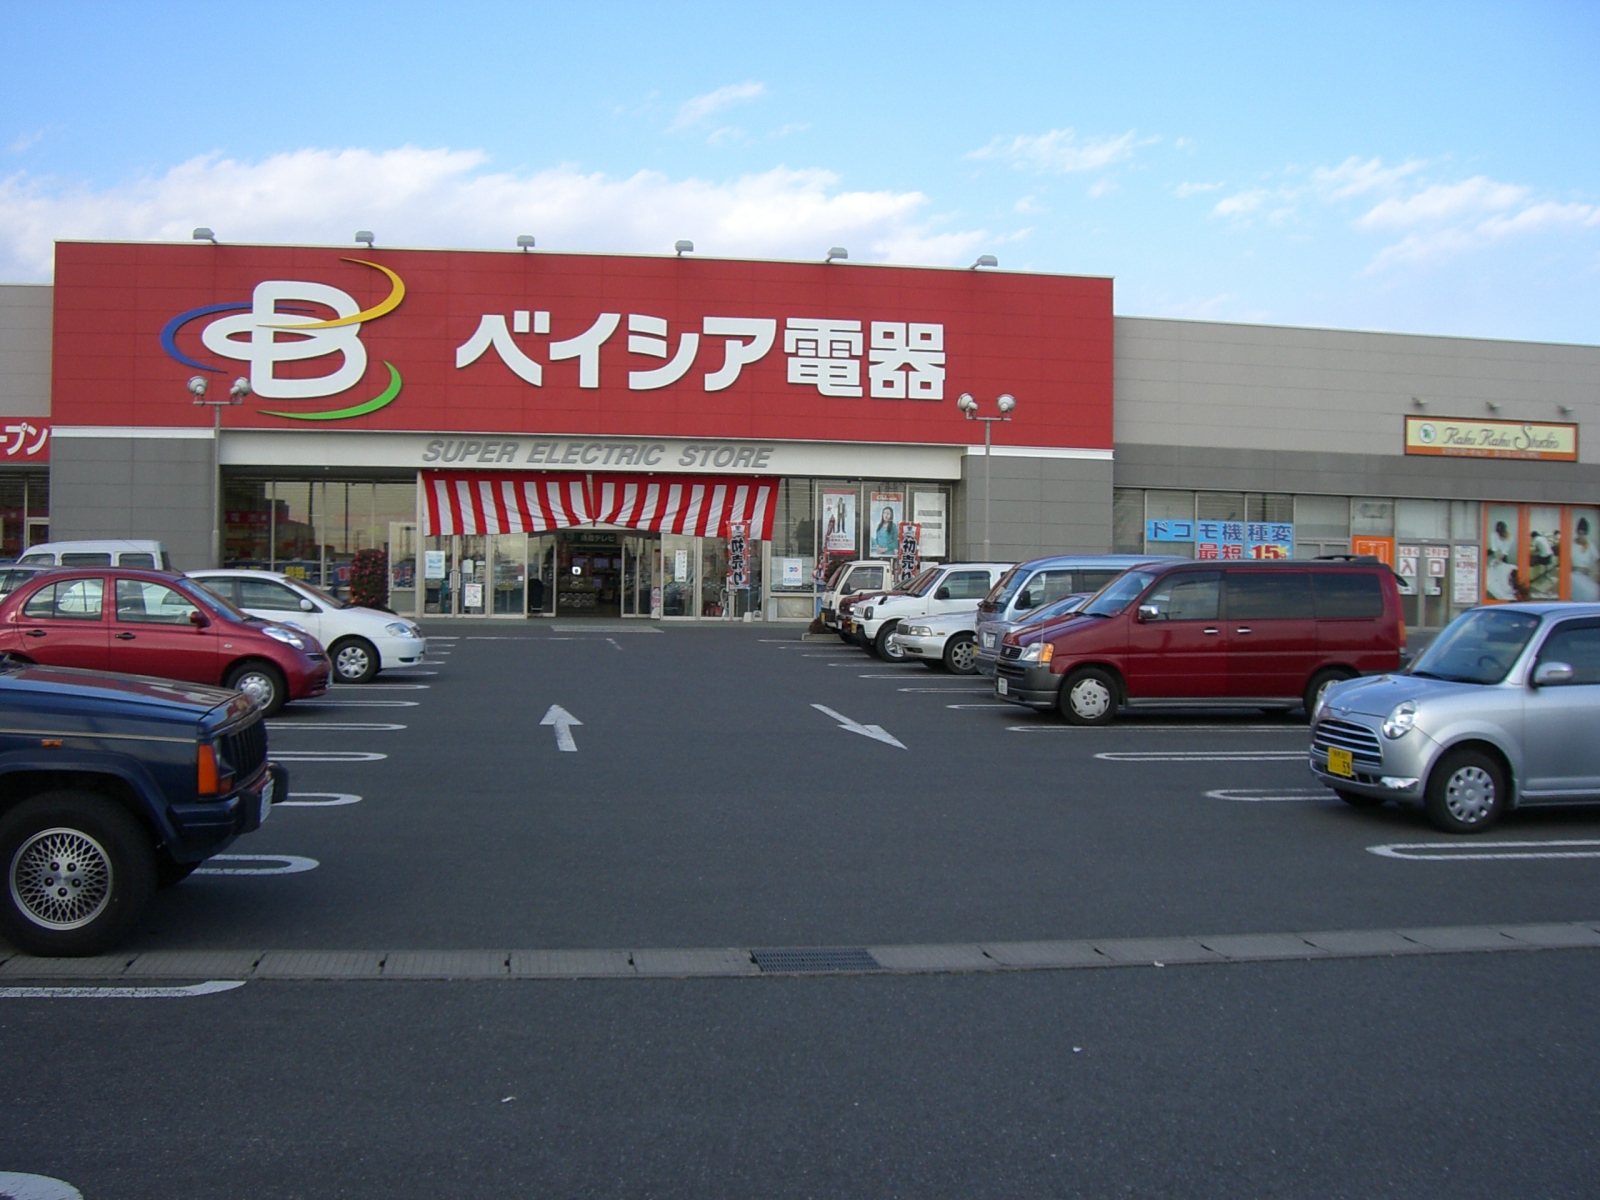 Home center. Beisia electronics Maebashi Mall store up (home improvement) 1809m